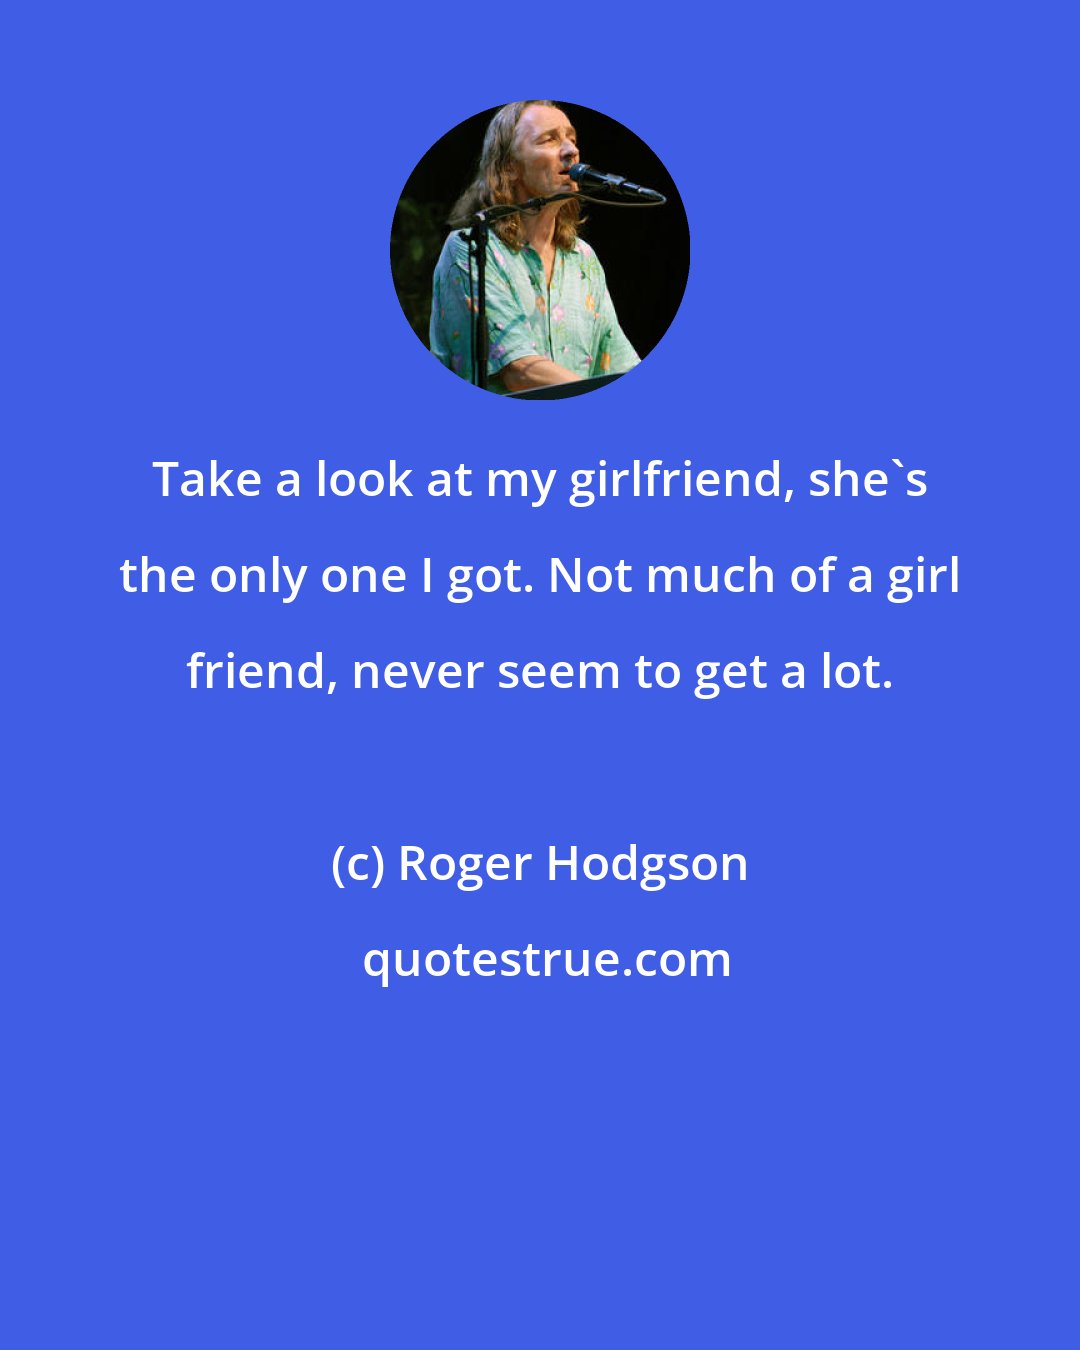 Roger Hodgson: Take a look at my girlfriend, she's the only one I got. Not much of a girl friend, never seem to get a lot.